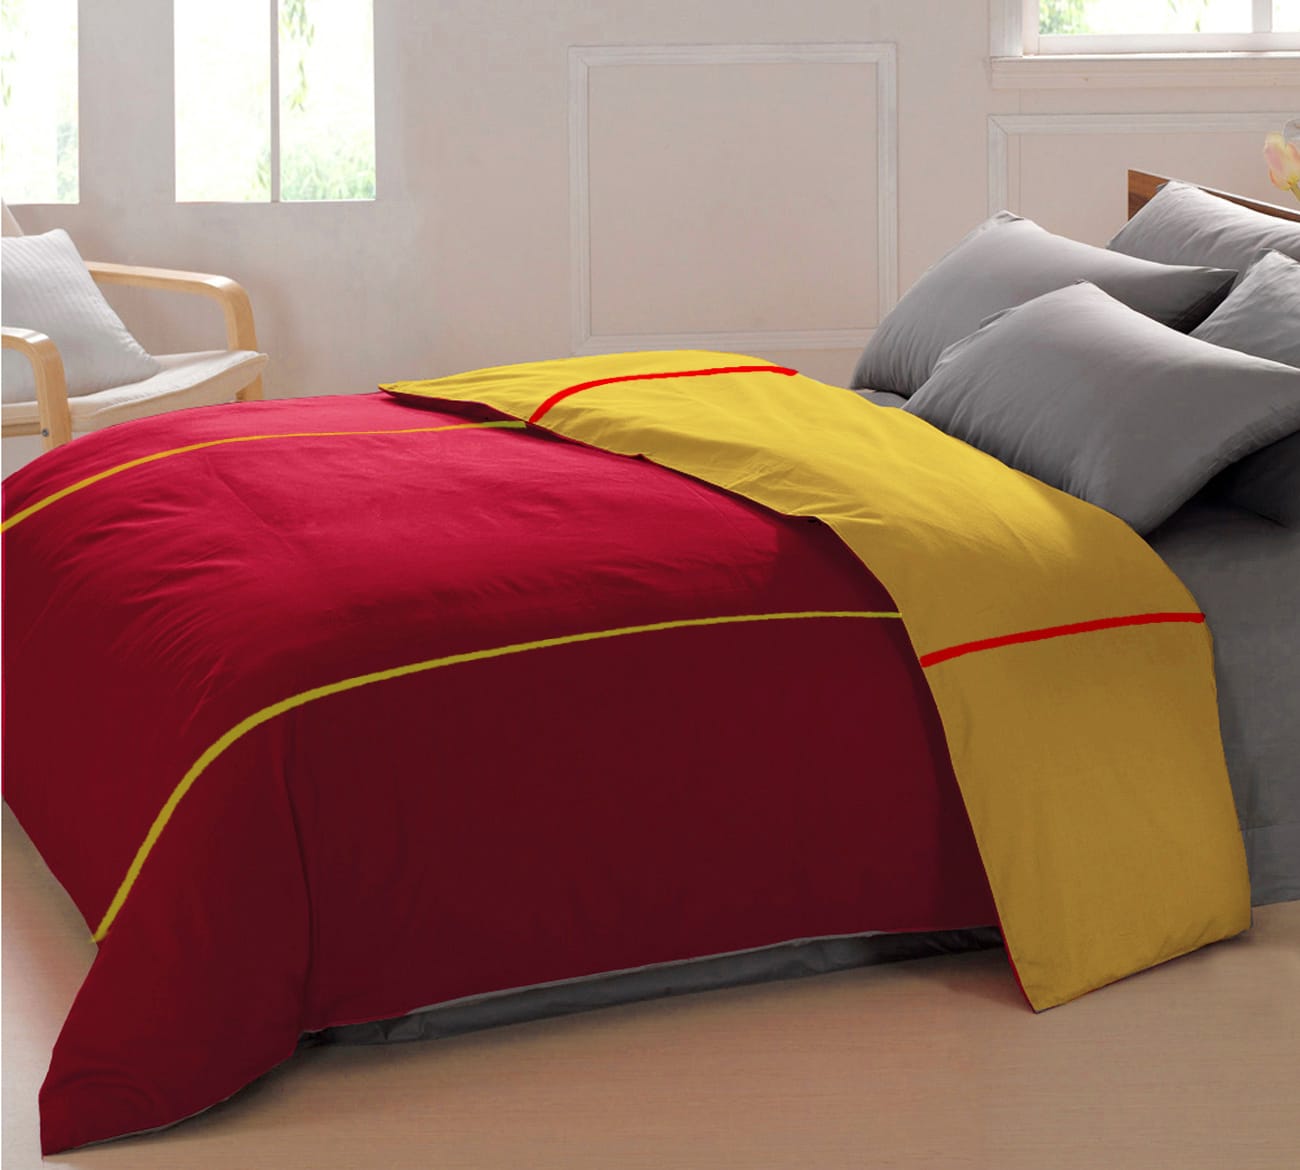 Soft Plain 210 Mercerised Cotton Duvet Cover In Maroon & Mustard Online At Best Prices